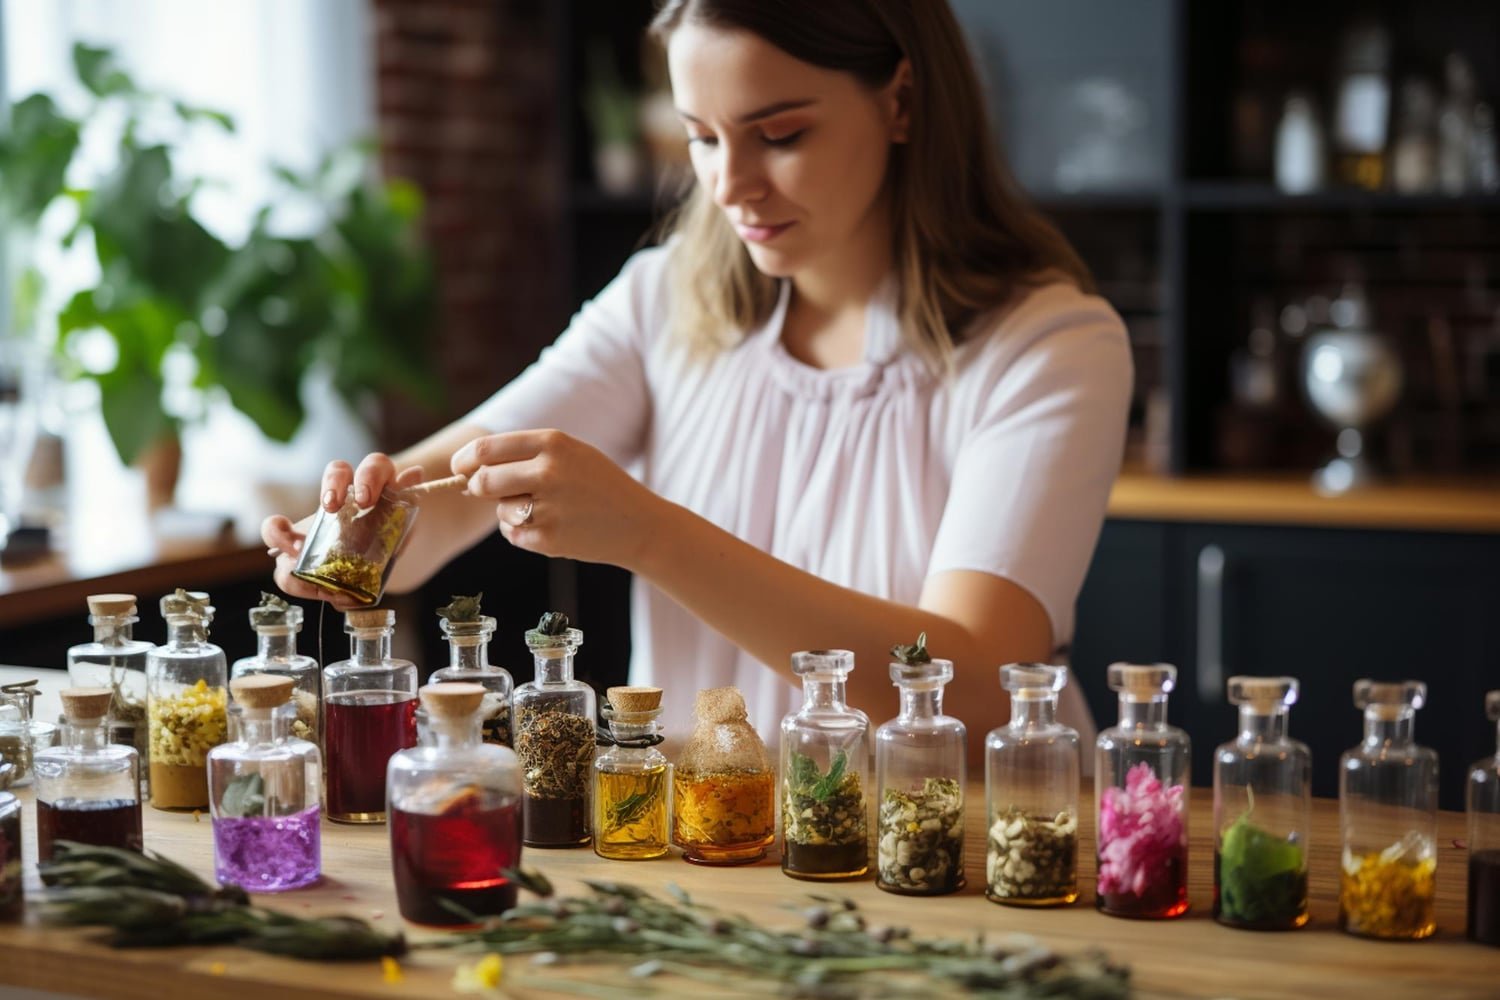 Experience Natural Wellness With Apotheke’s Handcrafted Home Fragrances